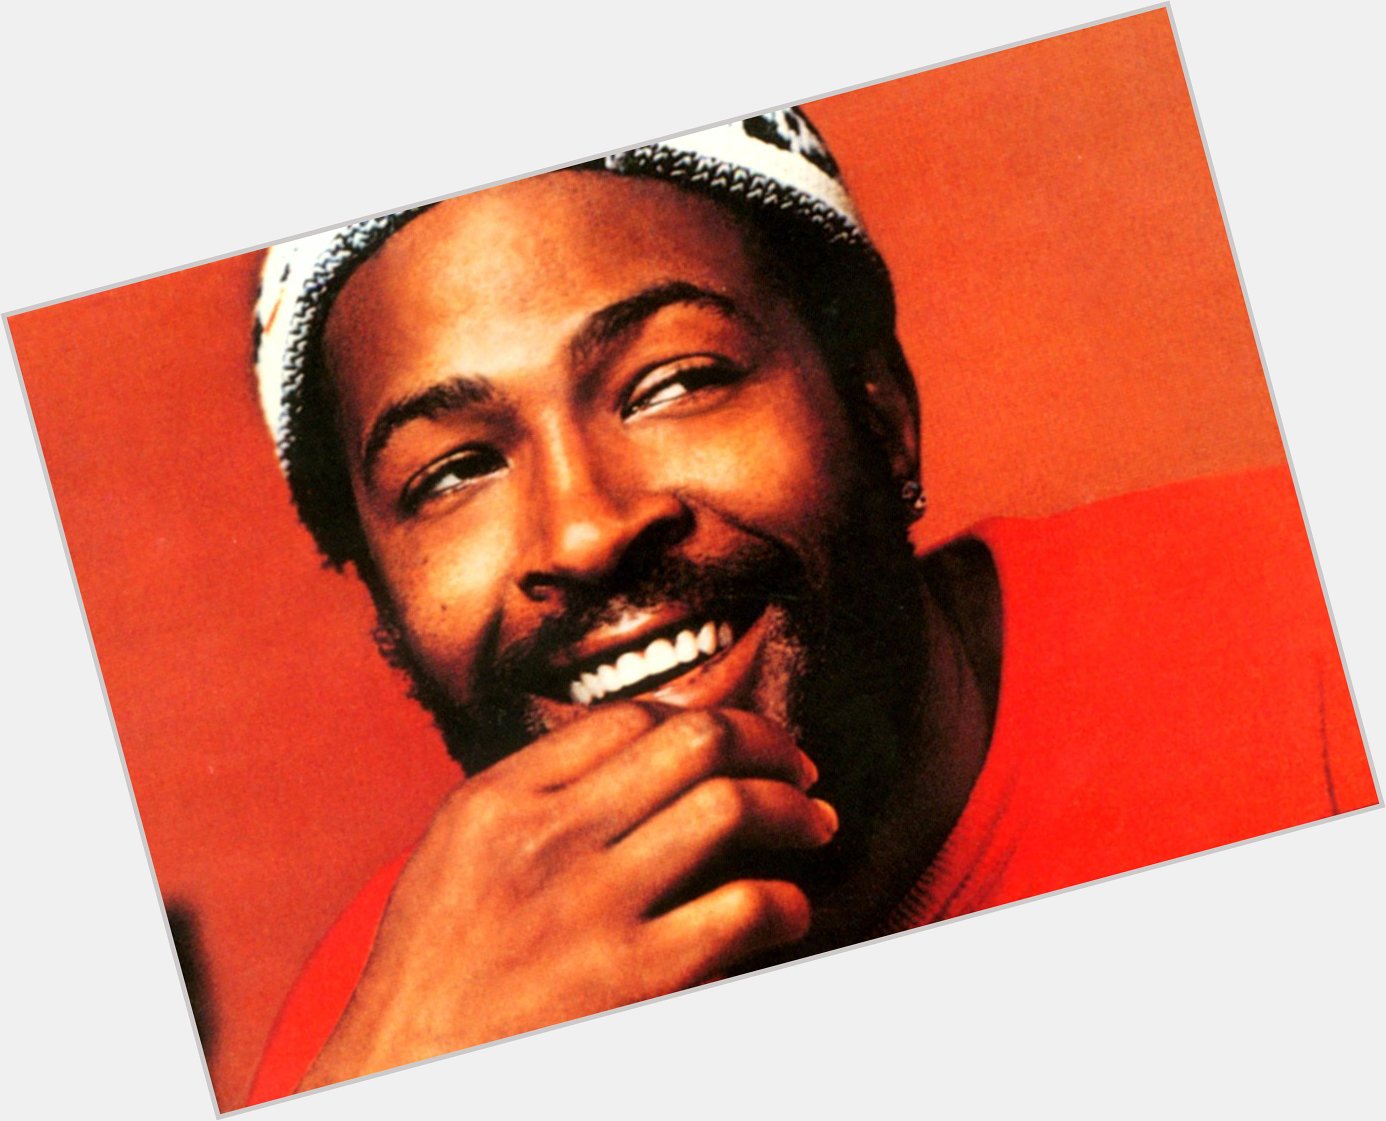 Happy Birthday to the legend Marvin Gaye! 76 today - Gone but not forgotten! 